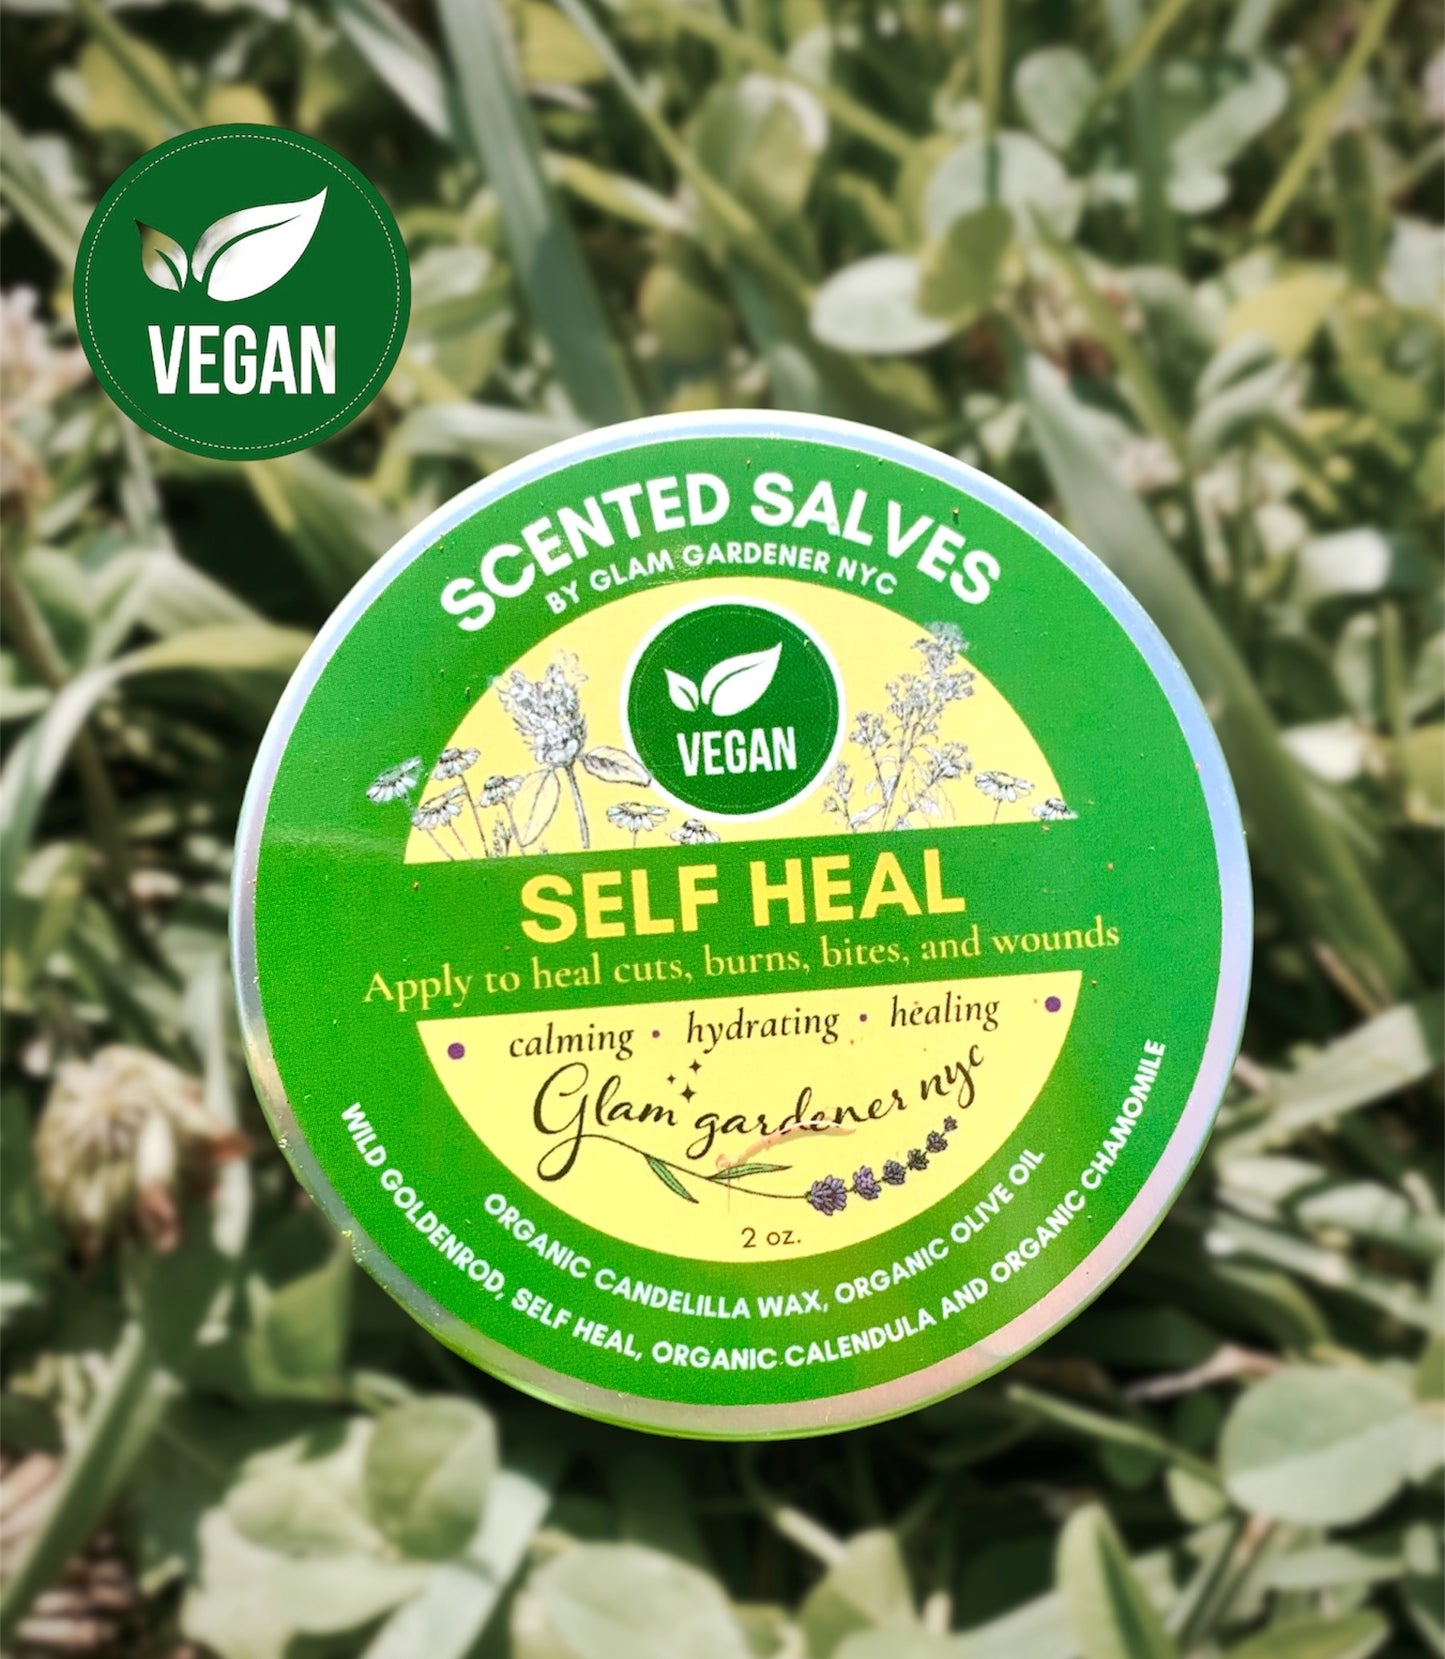 Vegan Self Heal scented salve, healing lotion, and natural perfume with organic calendula, organic chamomile, wild-harvested goldenrod, and wild-harvested self heal for cuts, burns, wounds and dry skin